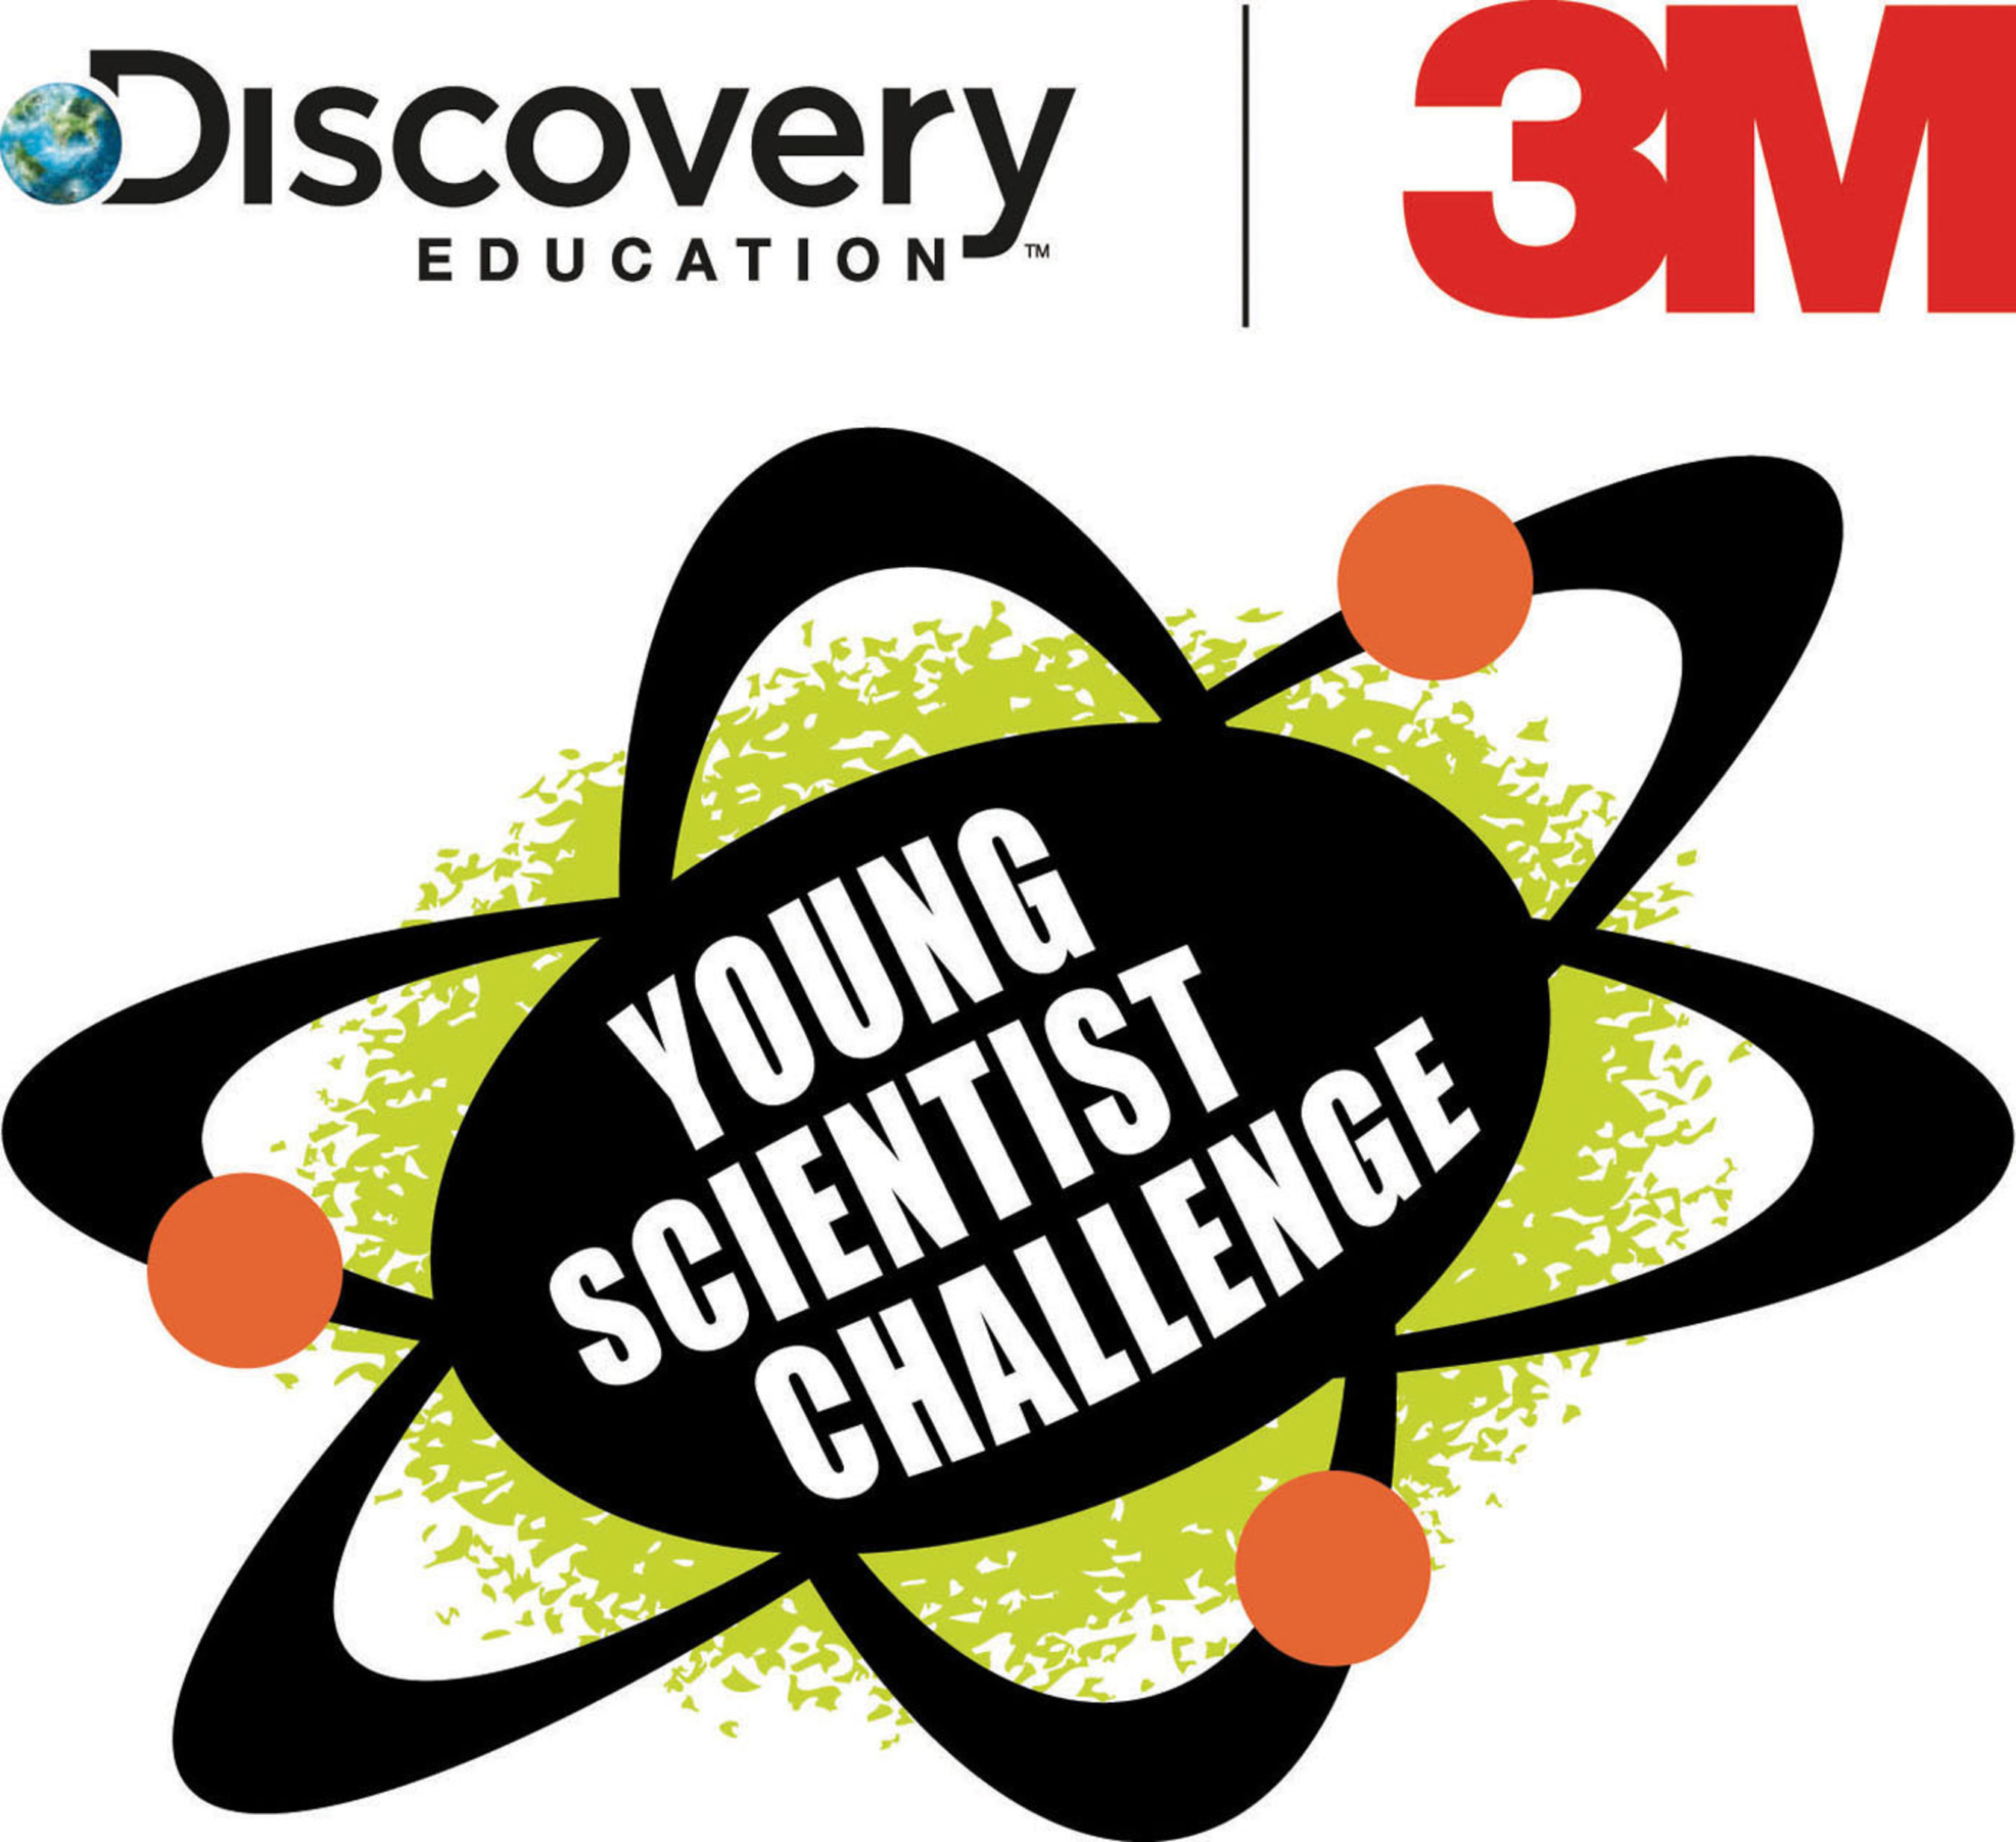 Discovery Education 3M Young Scientist Challenge.